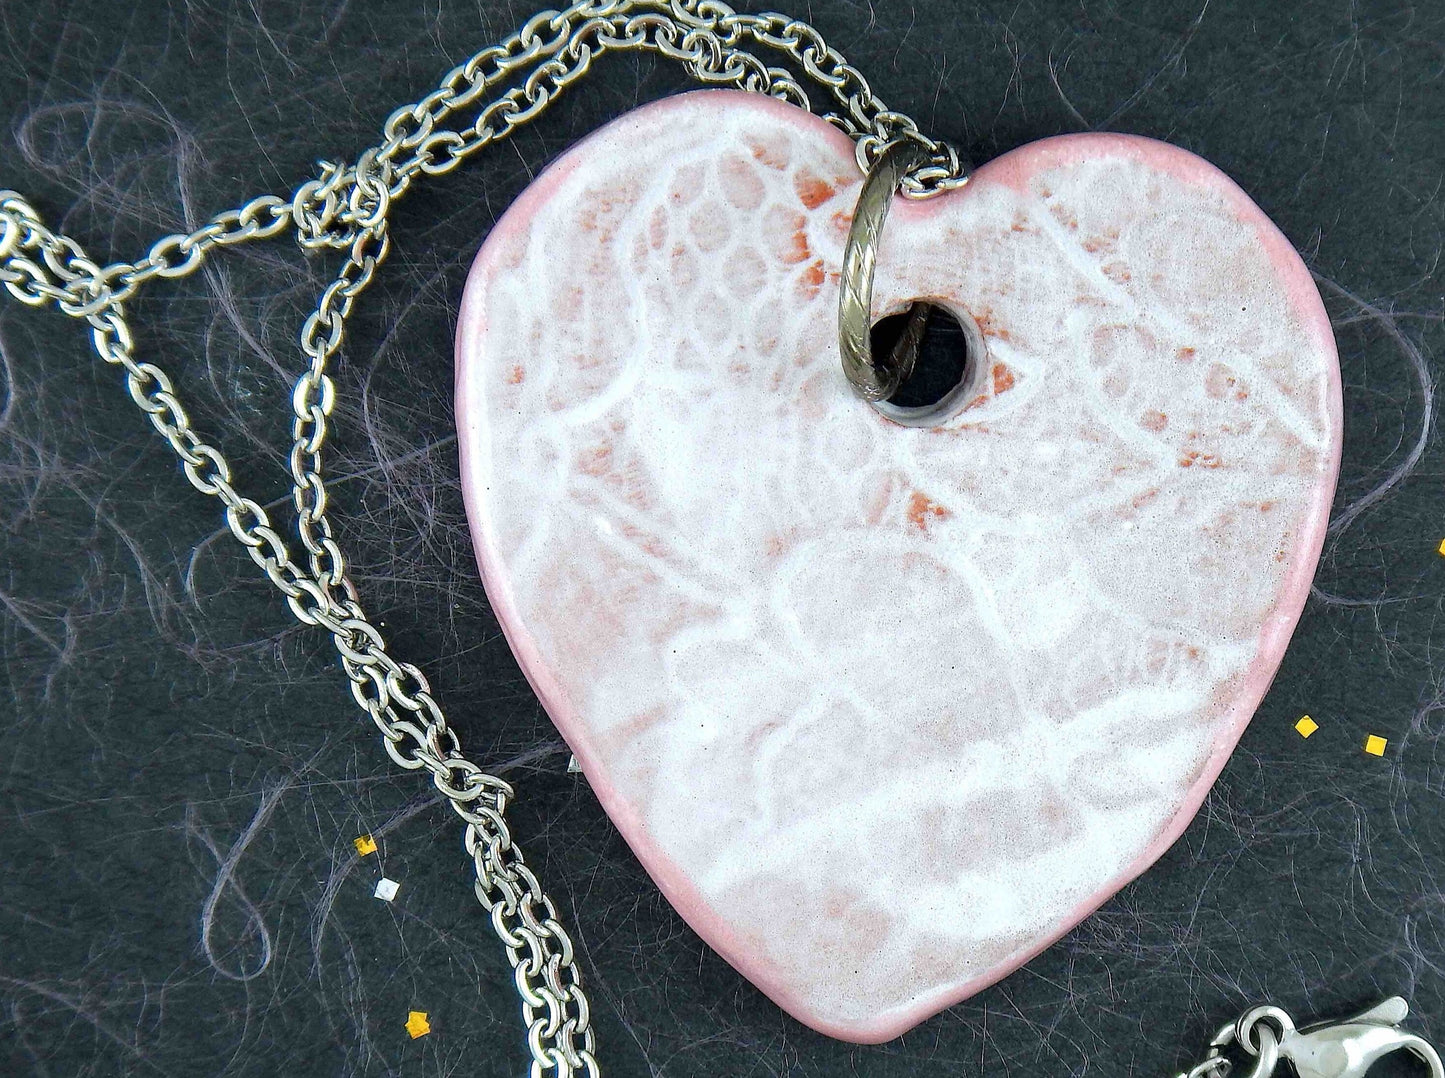 16-inch necklace with off-white ceramic heart pendant handmade in Montreal, lace pattern, stainless steel chain